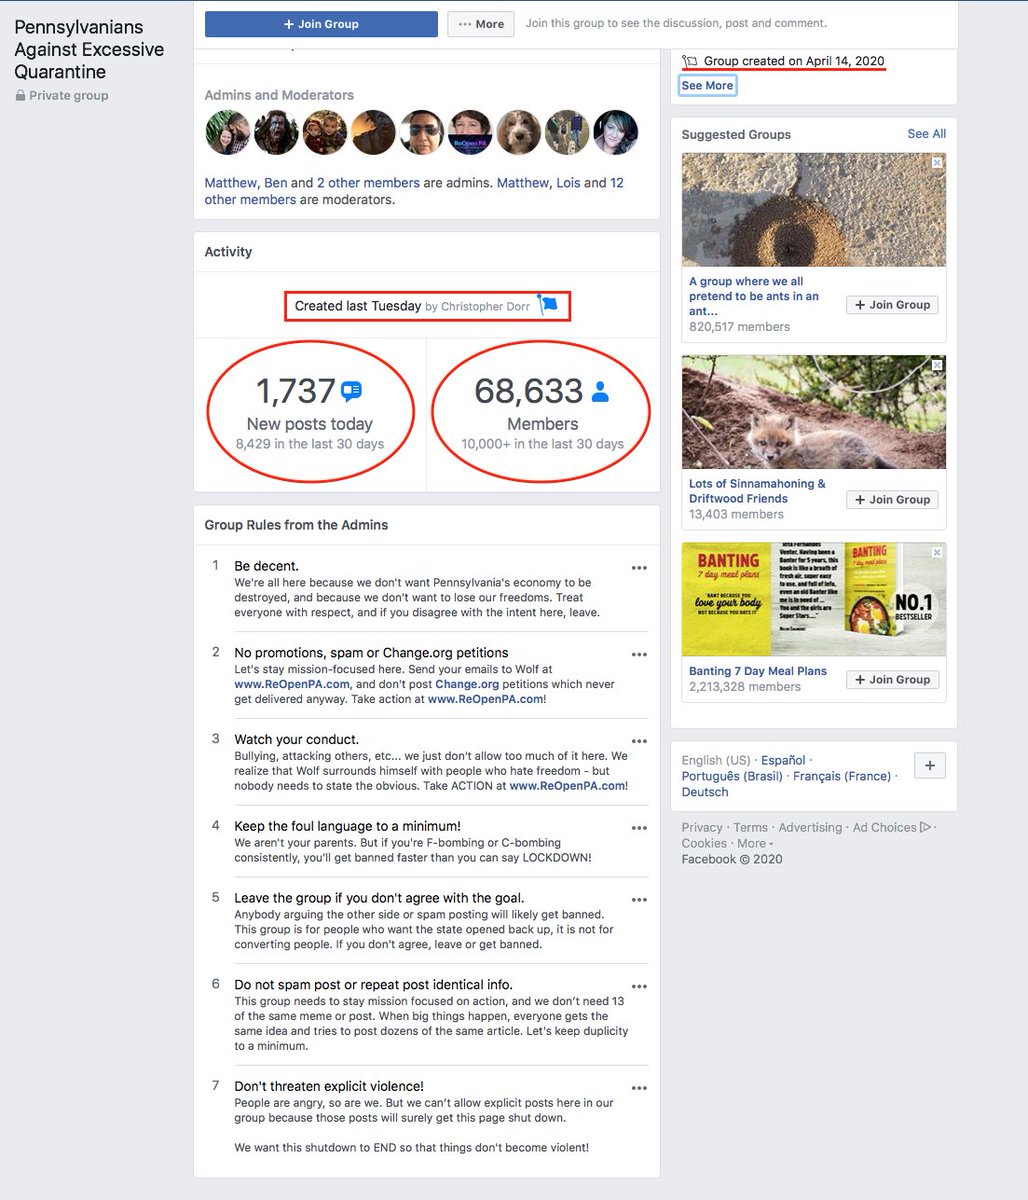 'Pennsylvanian Against Excessive Quarantine' Facebook Group created by Christopher Dorr, April 14, 2020 Redirect from www[.]REOpen[.]PA[.]com to Dorr Brothers 'Pennsylvania Firearms Association' https://action[.]pennsylvaniafirearmsassociation[.]org/action/end-wolfs-shutdown/